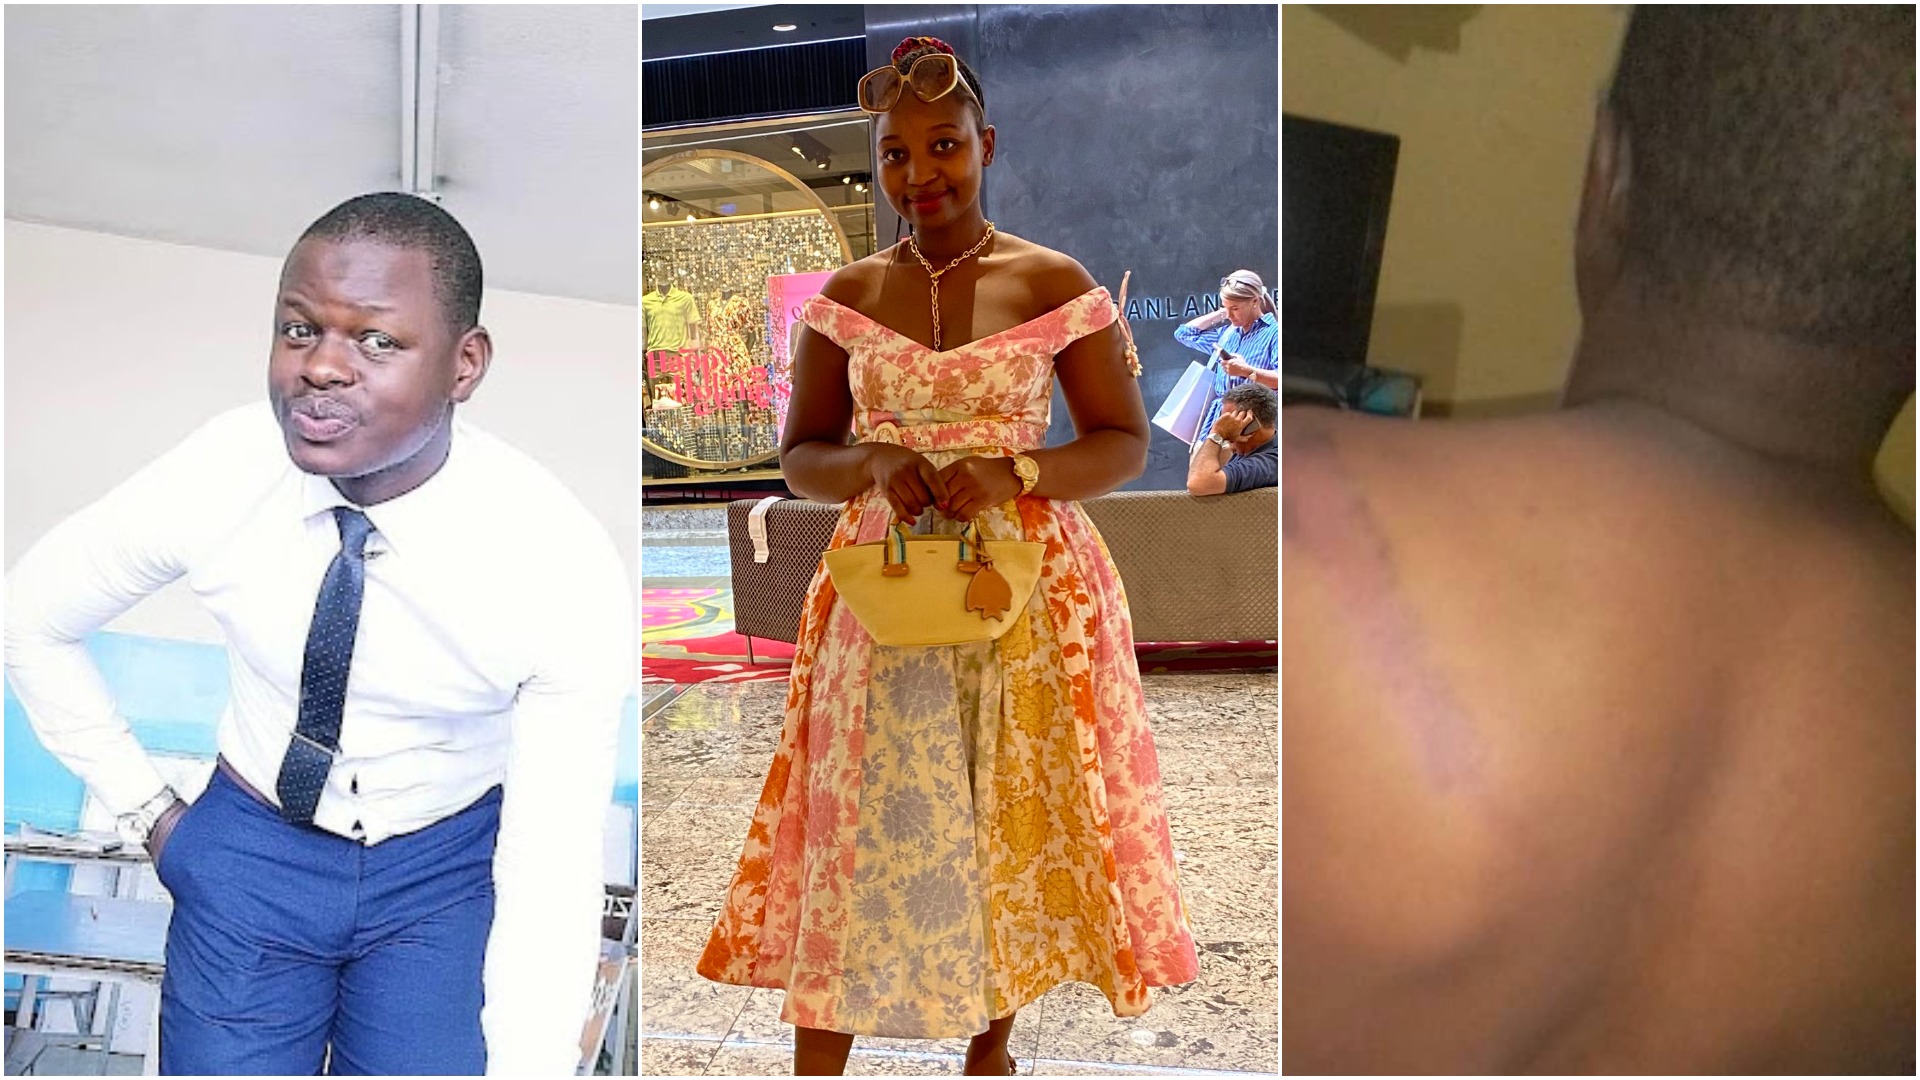 Trending On Social Media| “Violent” Teacher Boasts Of Pass Rate| Wearing Yellow Now An Offence | Mliswa’s Baby Mama Threatens Varakashi, Warns She Will Expose Secrets